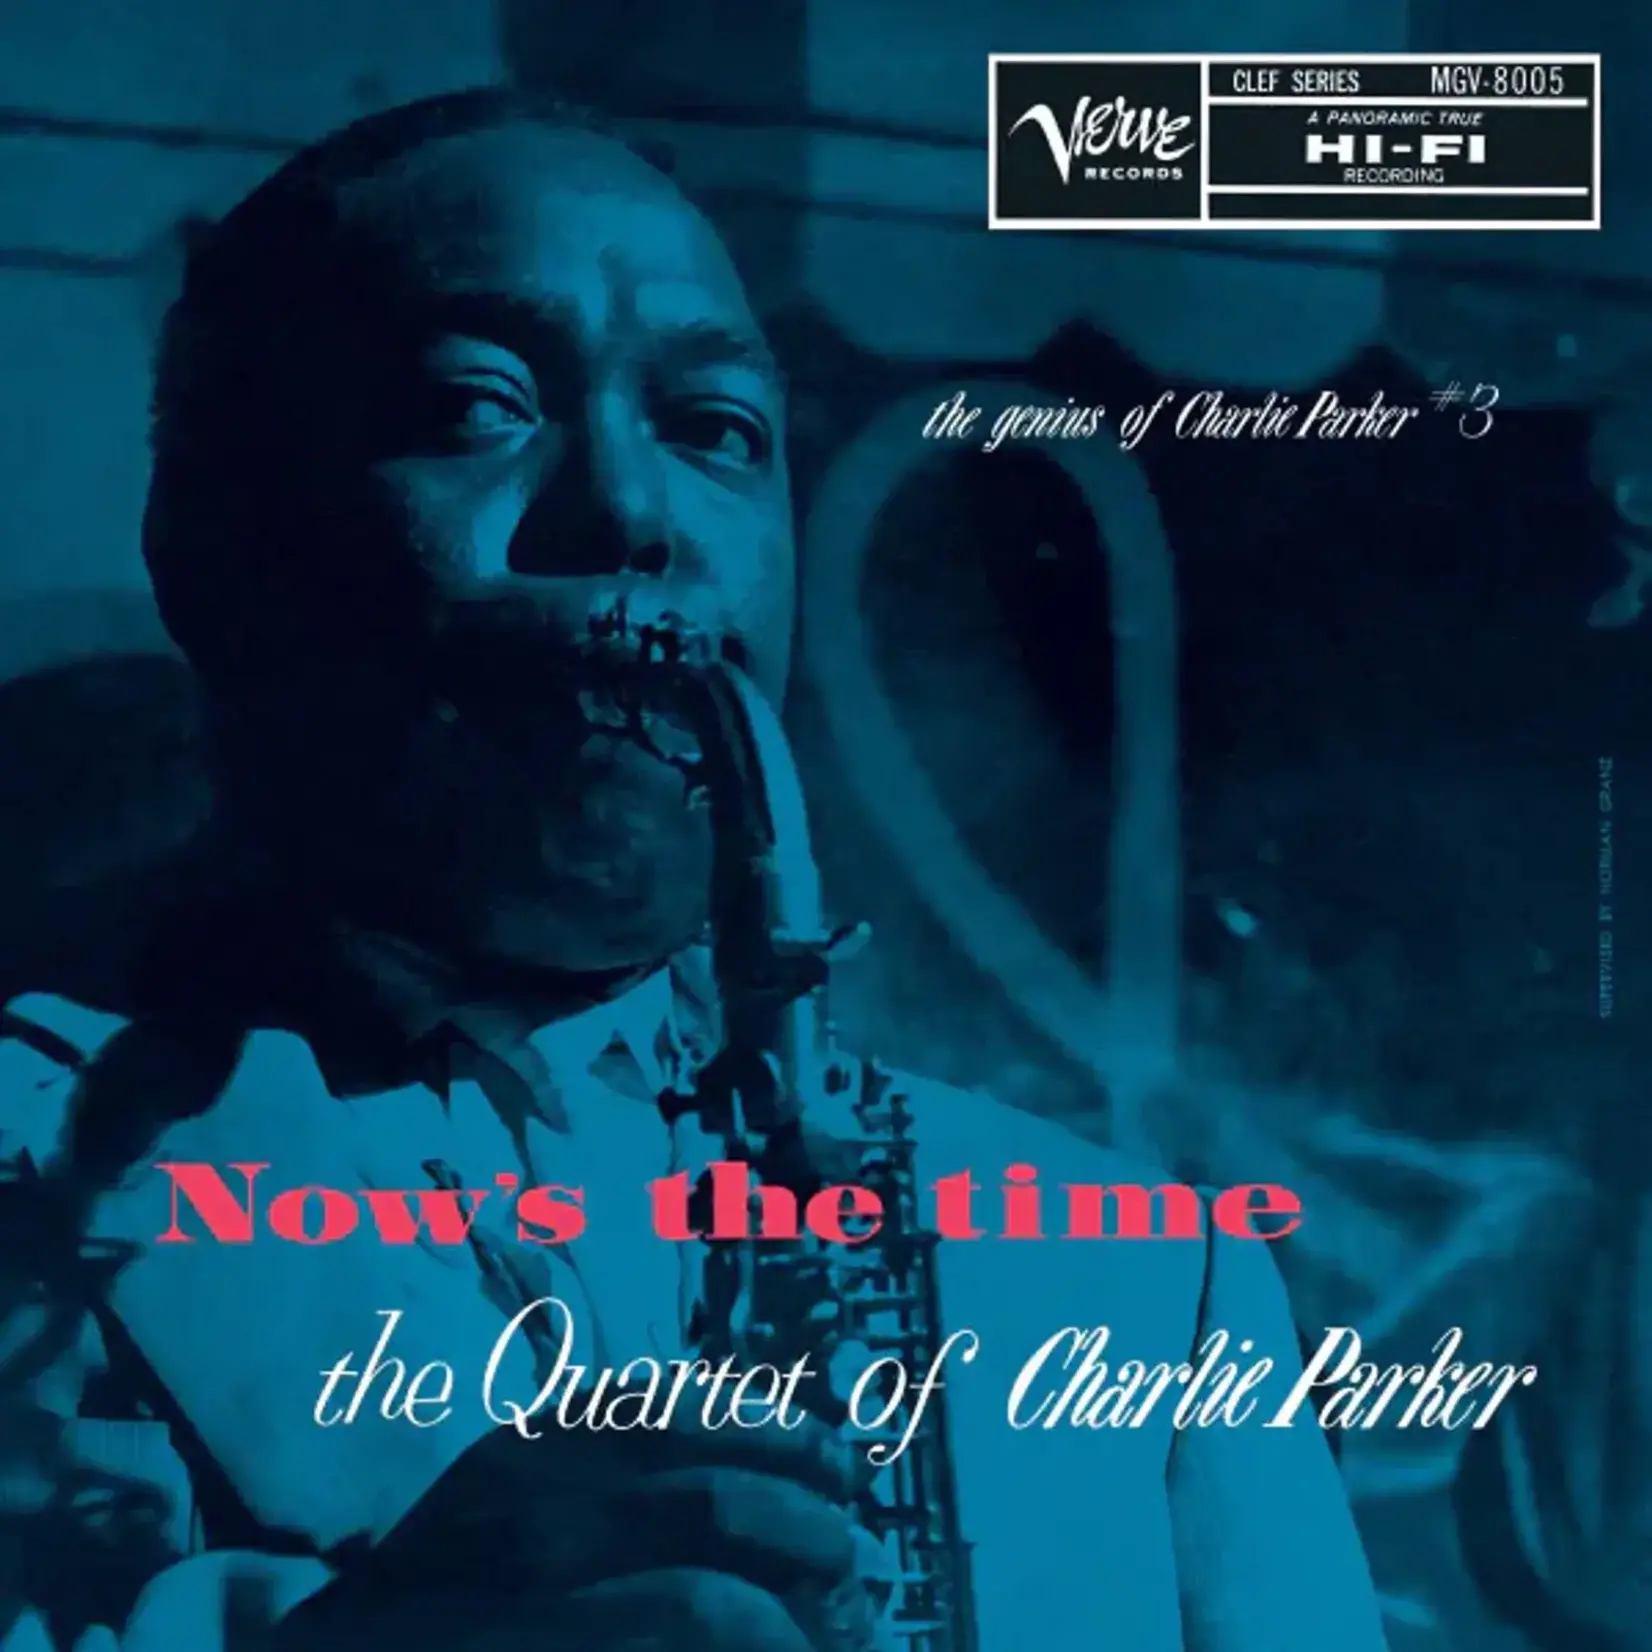 [New] Charlie Parker - Now's The Time - The Genius Of Charlie Parker #3 (Verve By Request Series)